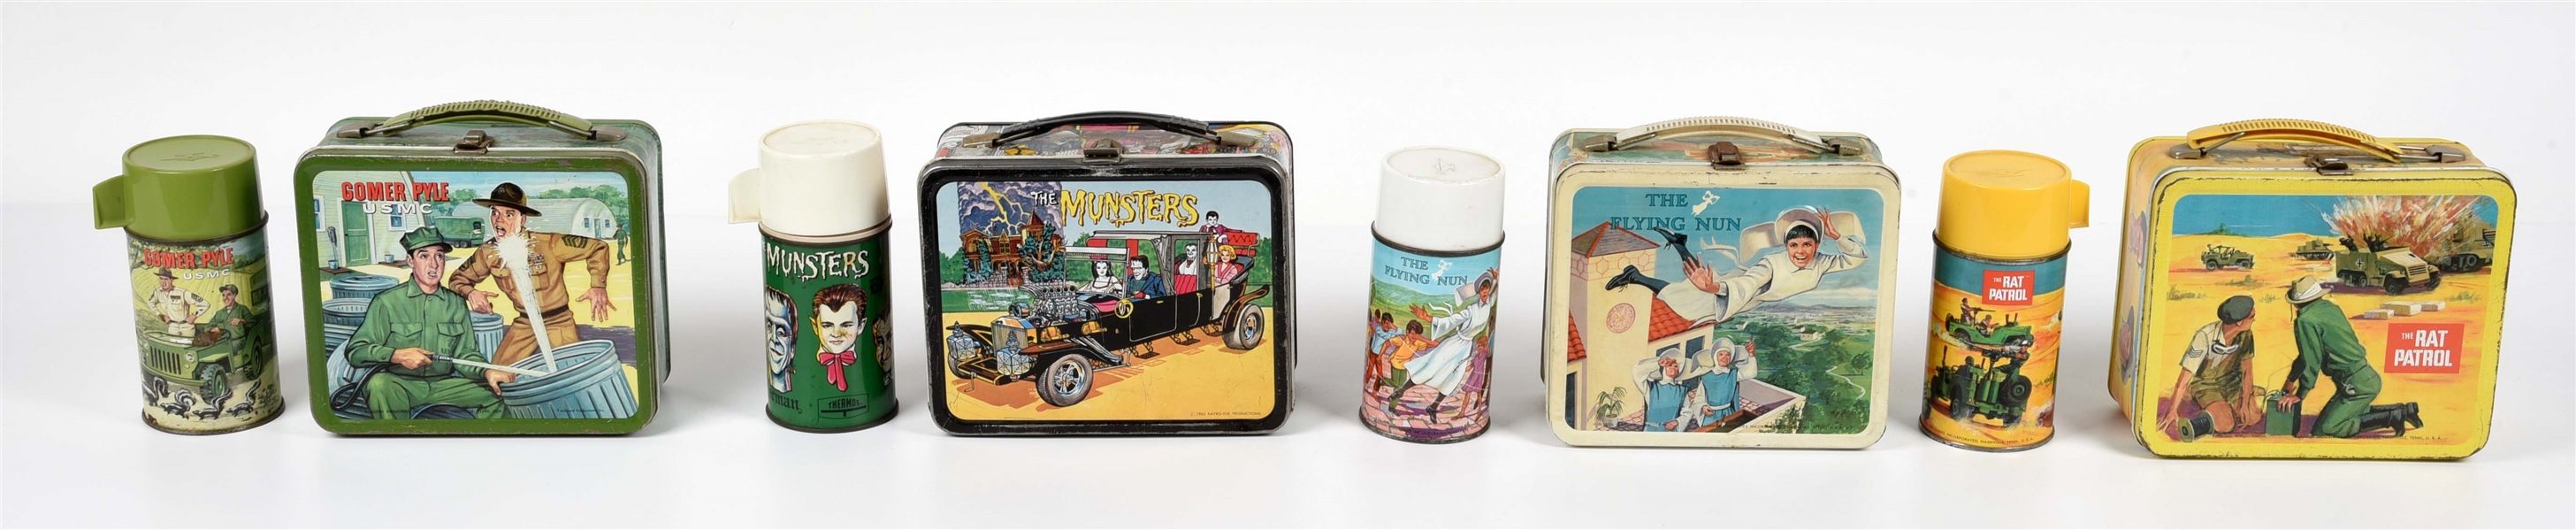 LOT OF 4: VARIOUS 1960S TV-RELATED METAL LUNCHBOXES.